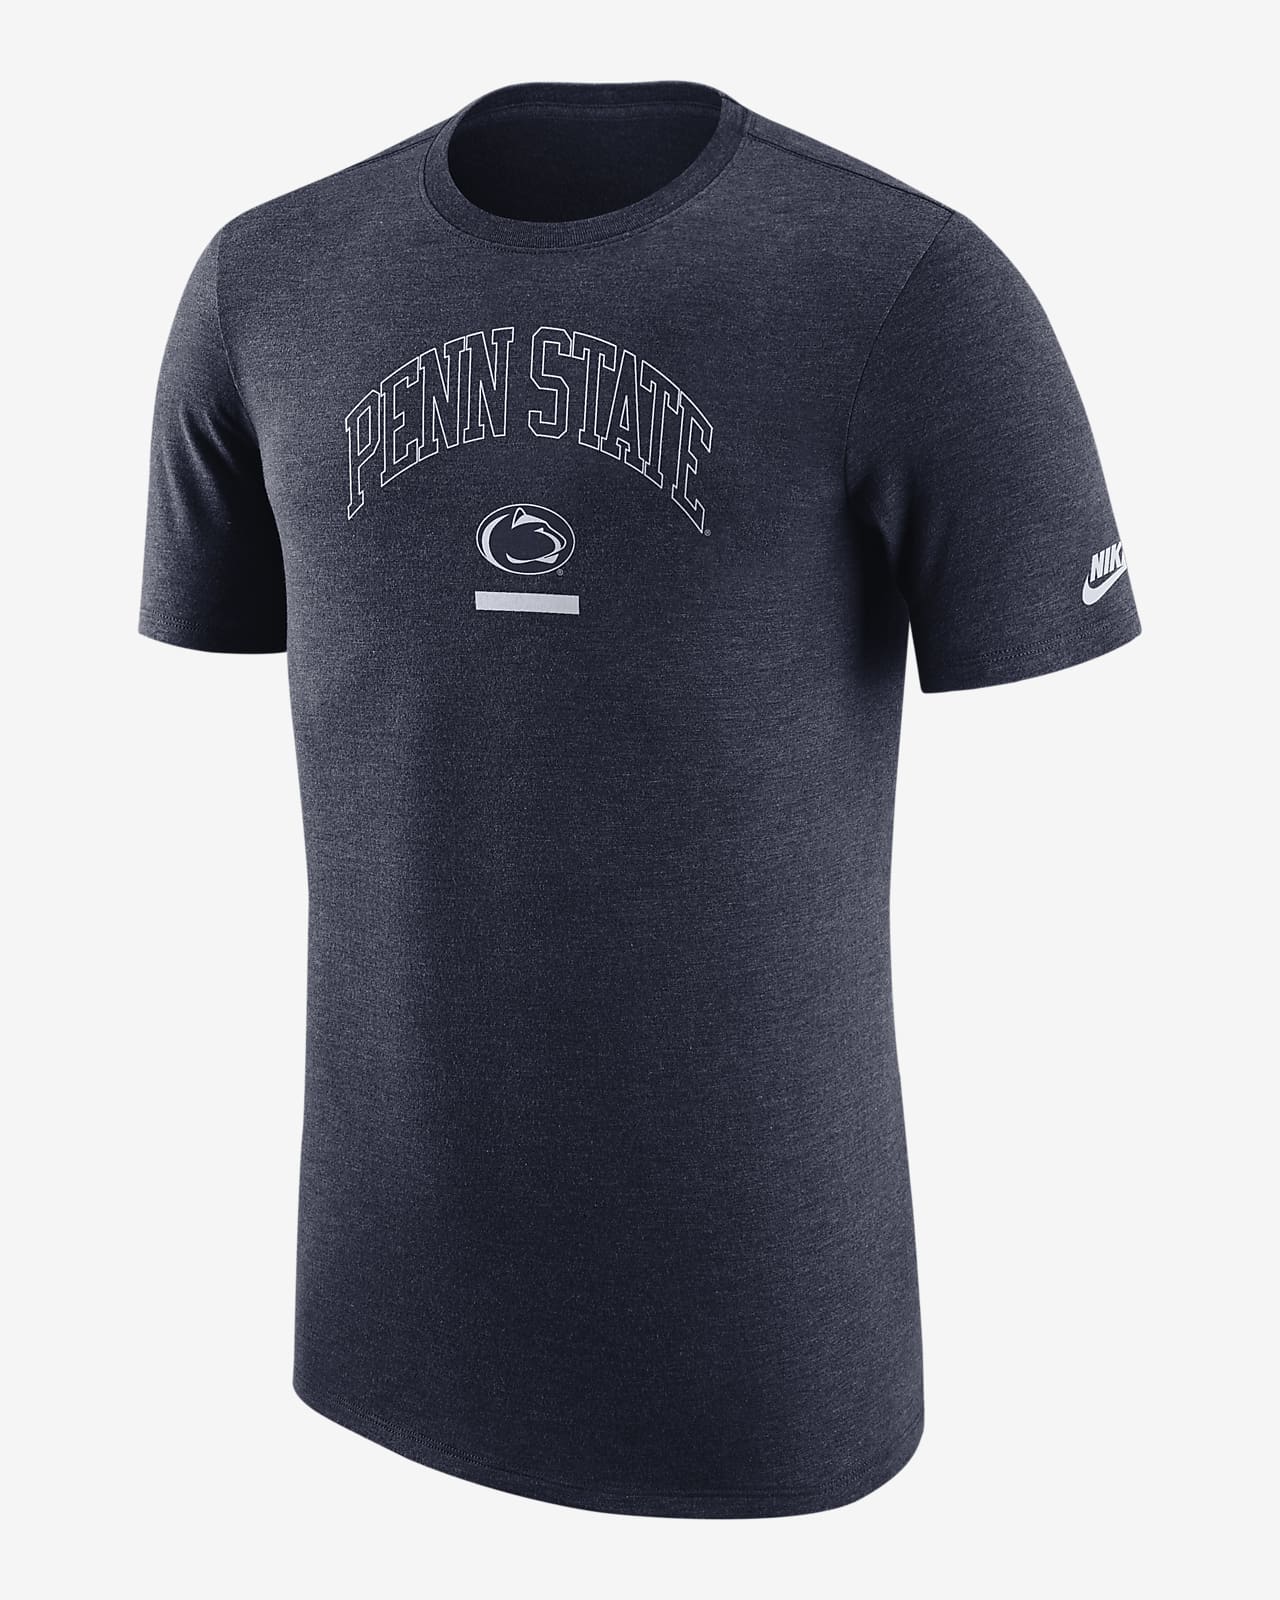 Nike College (Penn State) Men's Graphic T-Shirt